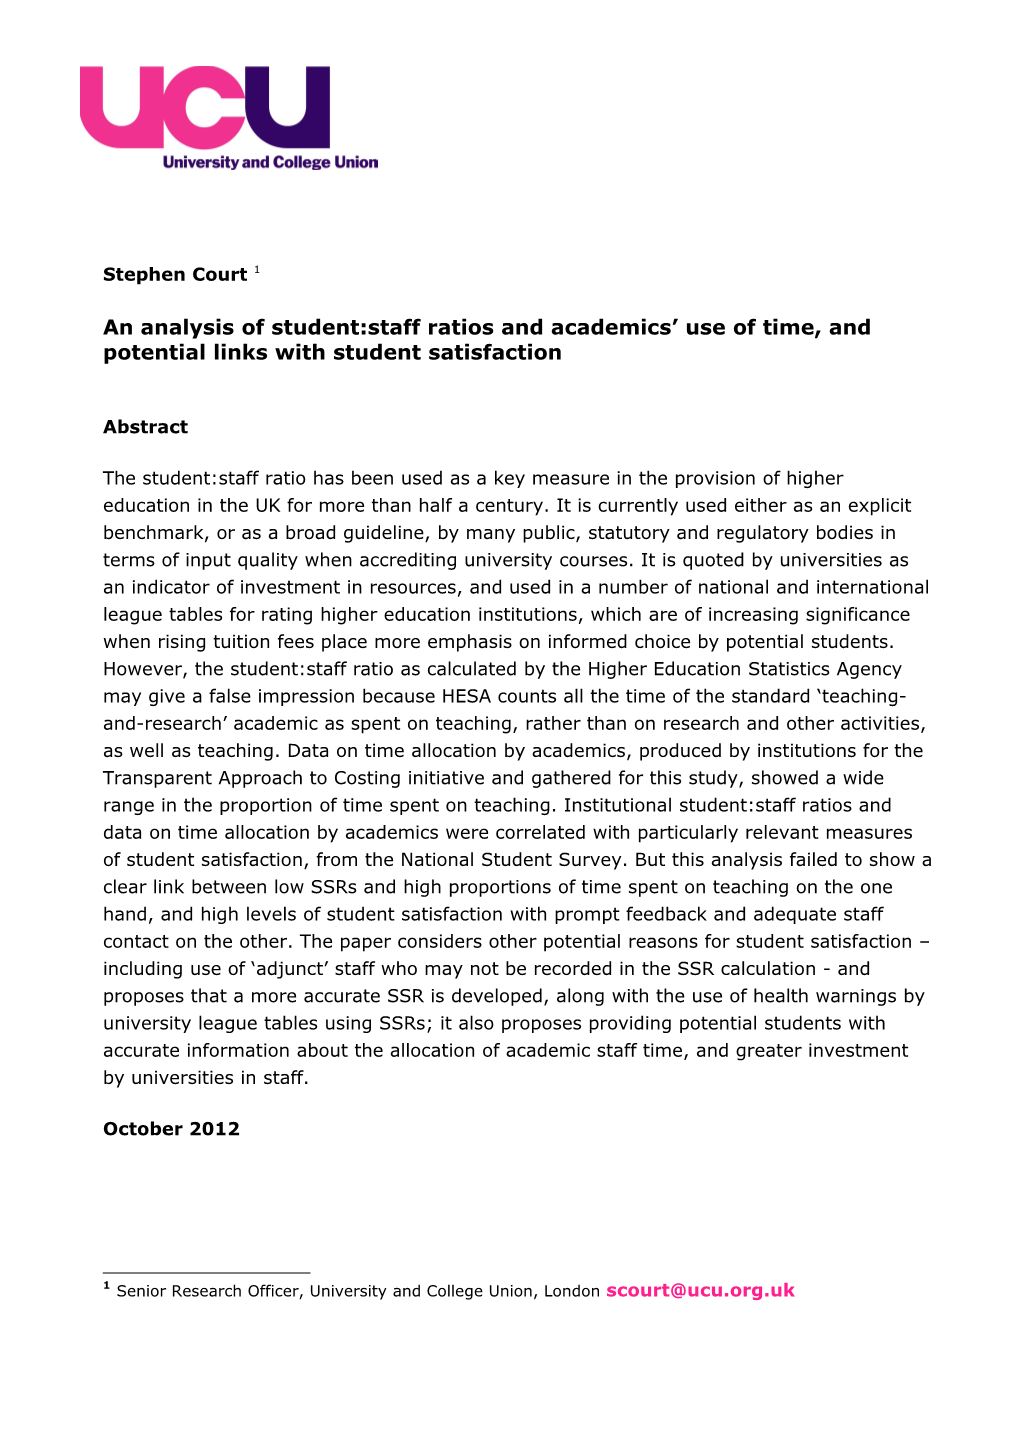 An Analysis of Student:Staff Ratios and Academics Use of Time, and Potential Links With